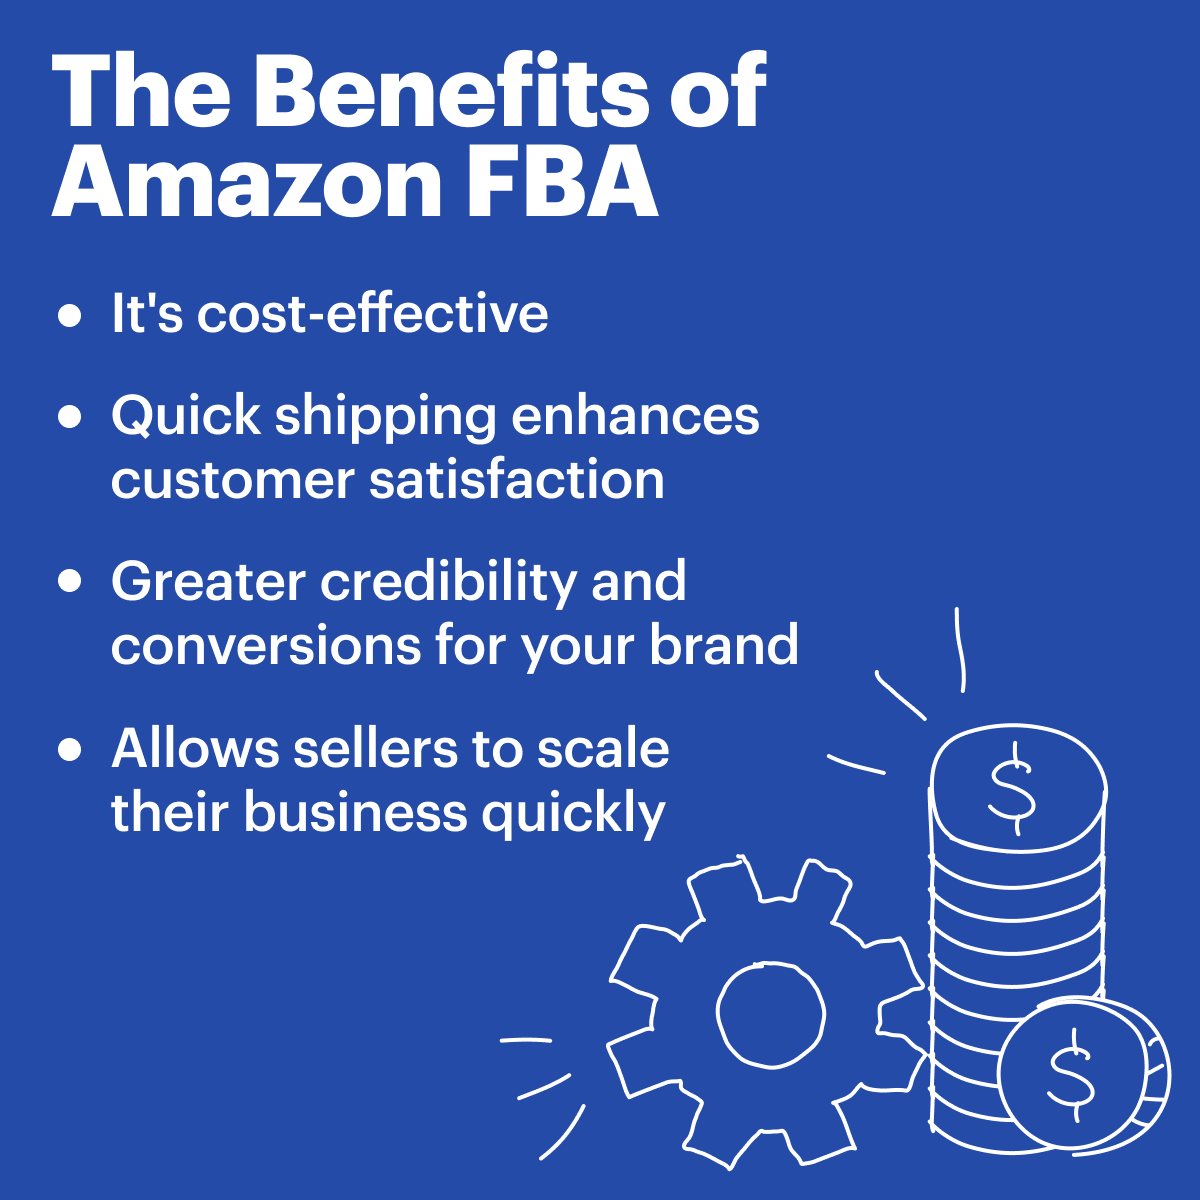 What are the benefits of Amazon FBA?